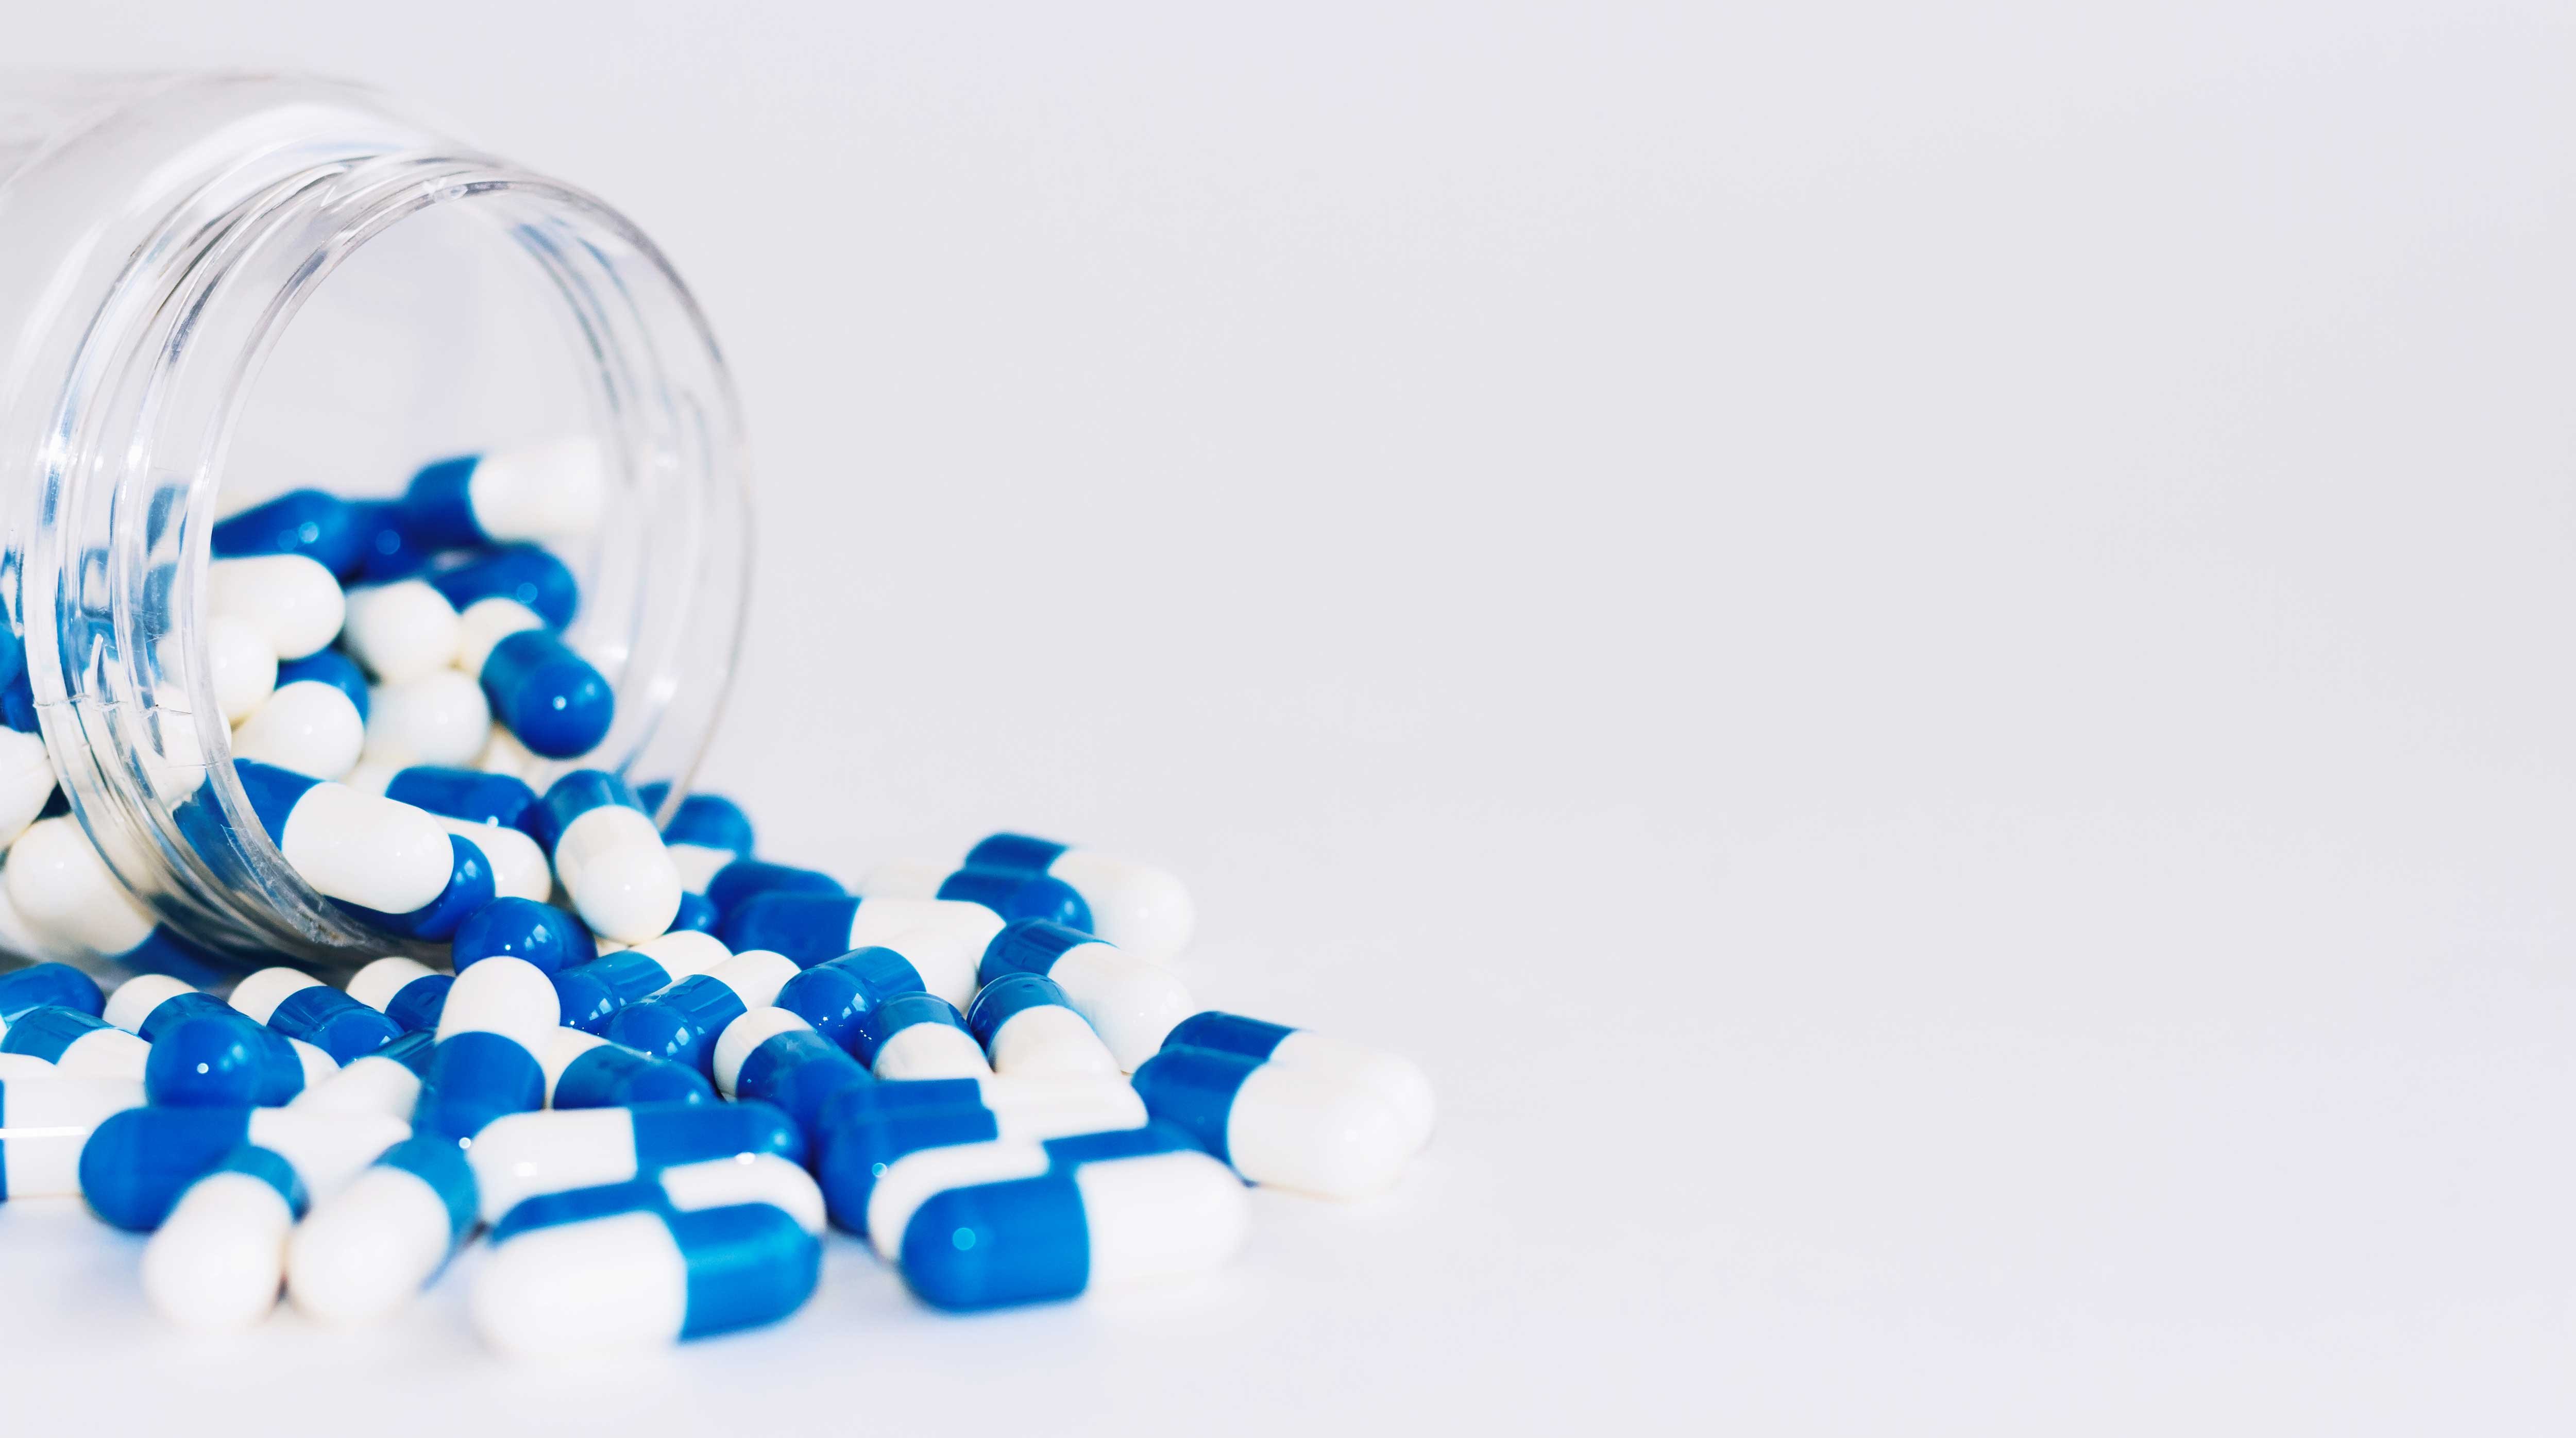 blue-white-capsules-pill-spilled-out-from-white-plastic-bottle-container-global-healthcare-concept-antibiotics-drug-resistance-antimicrobial-capsule-pills-pharmaceutical-industry-pharmacy